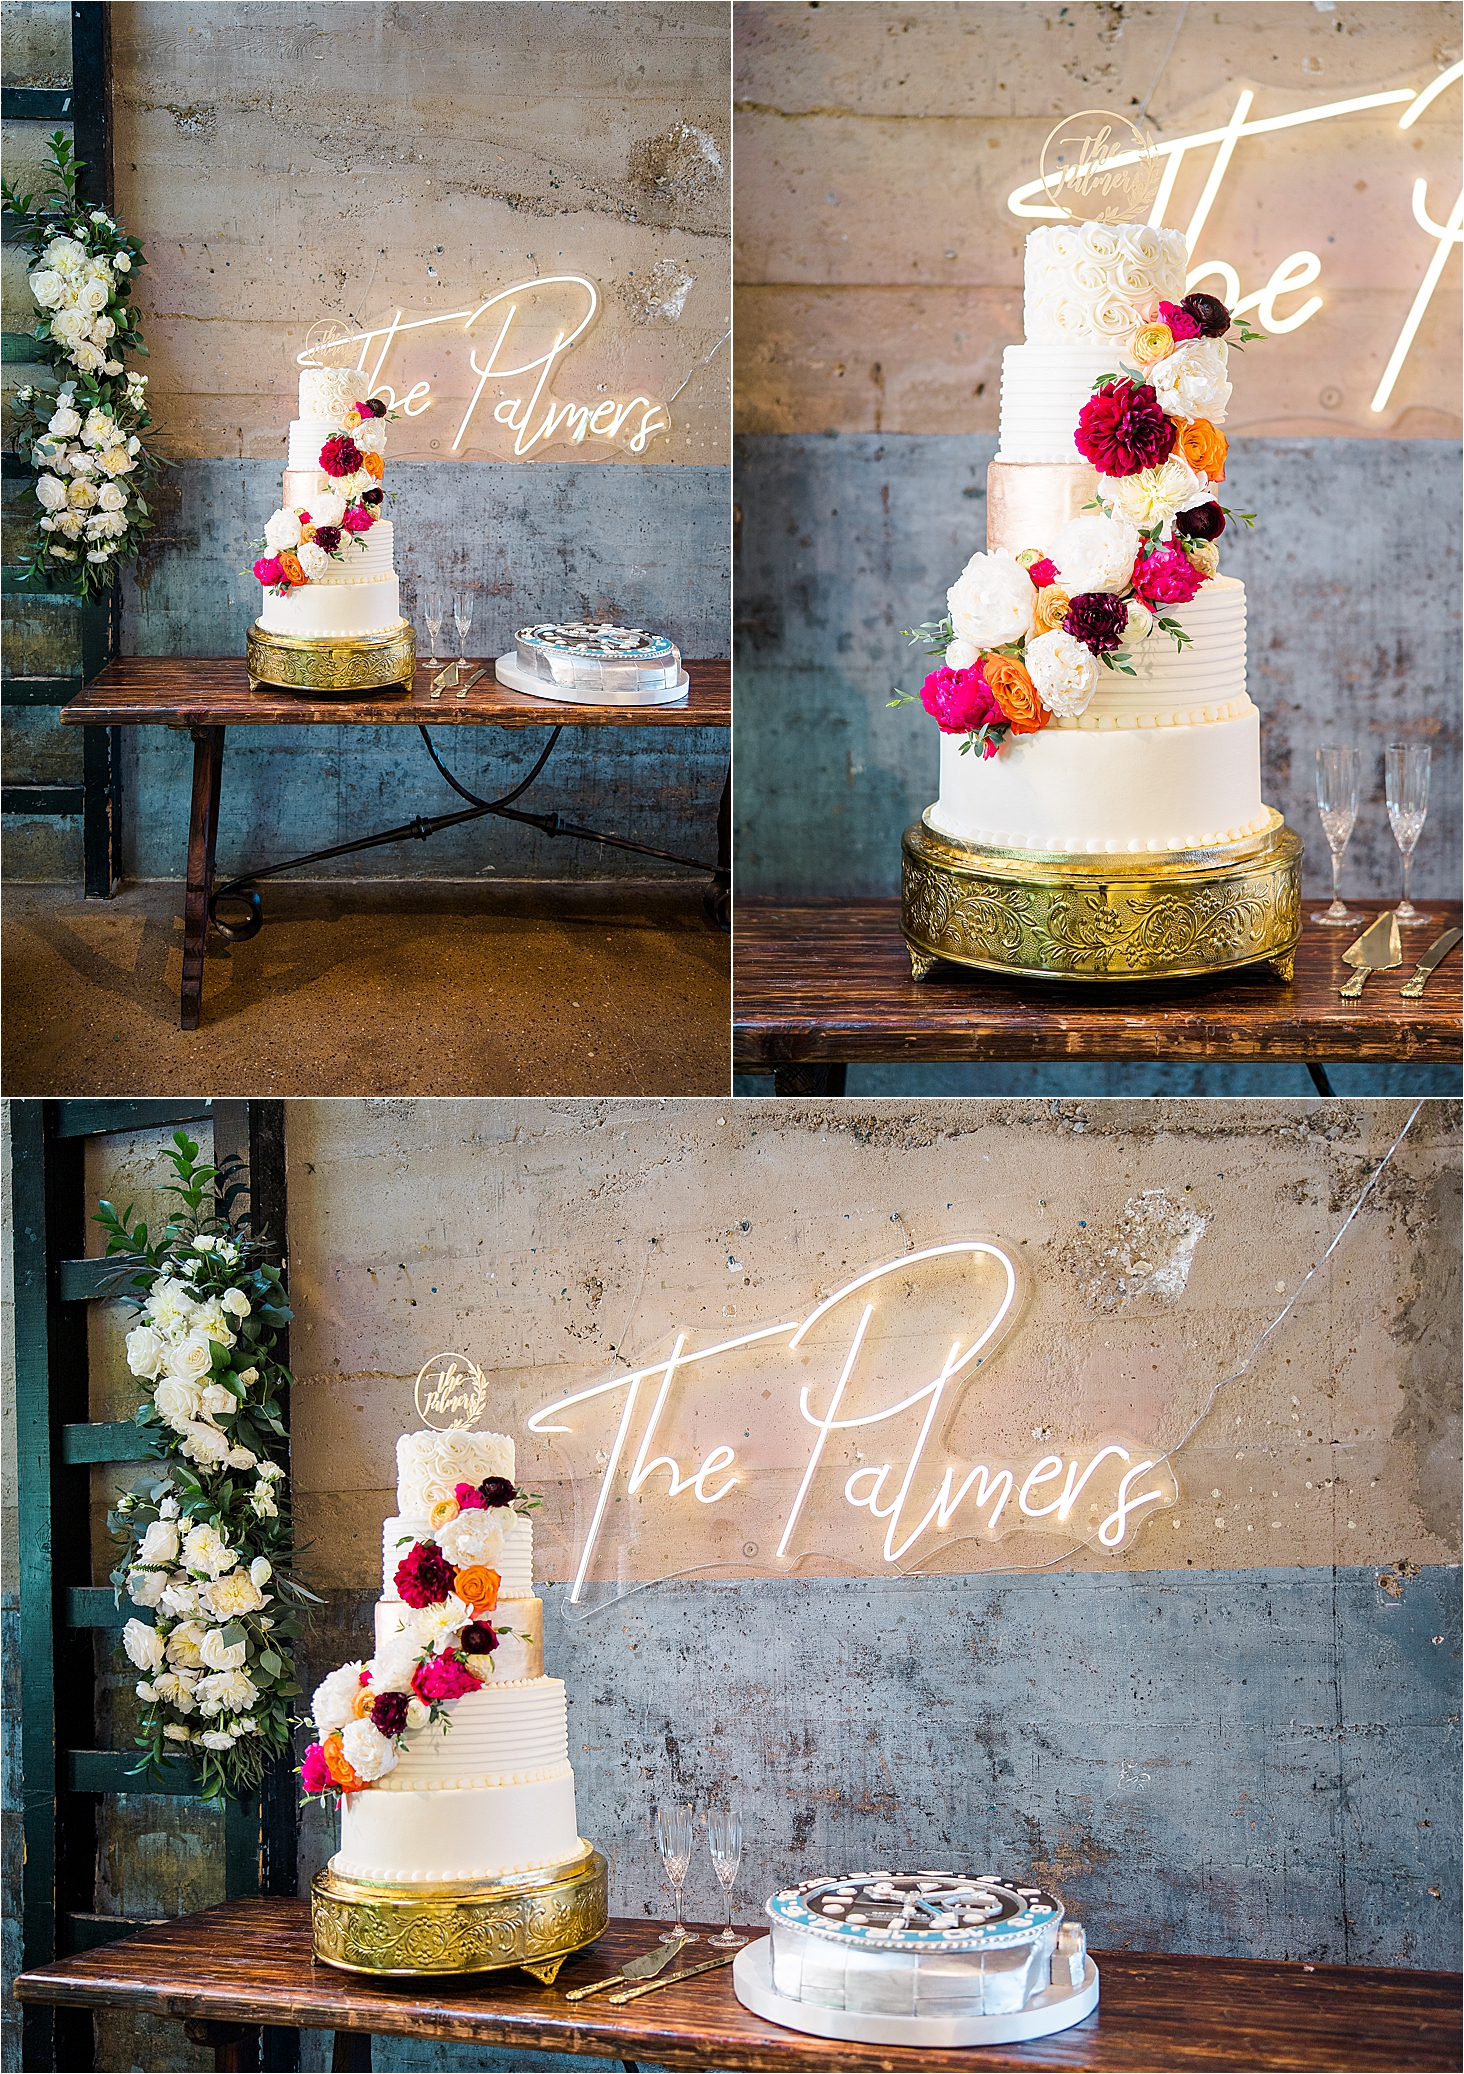 A three tier cake wrapped in Florals by Fancy Cakes at Hickory Street Annex with a Neon sign above by DFW Neon 